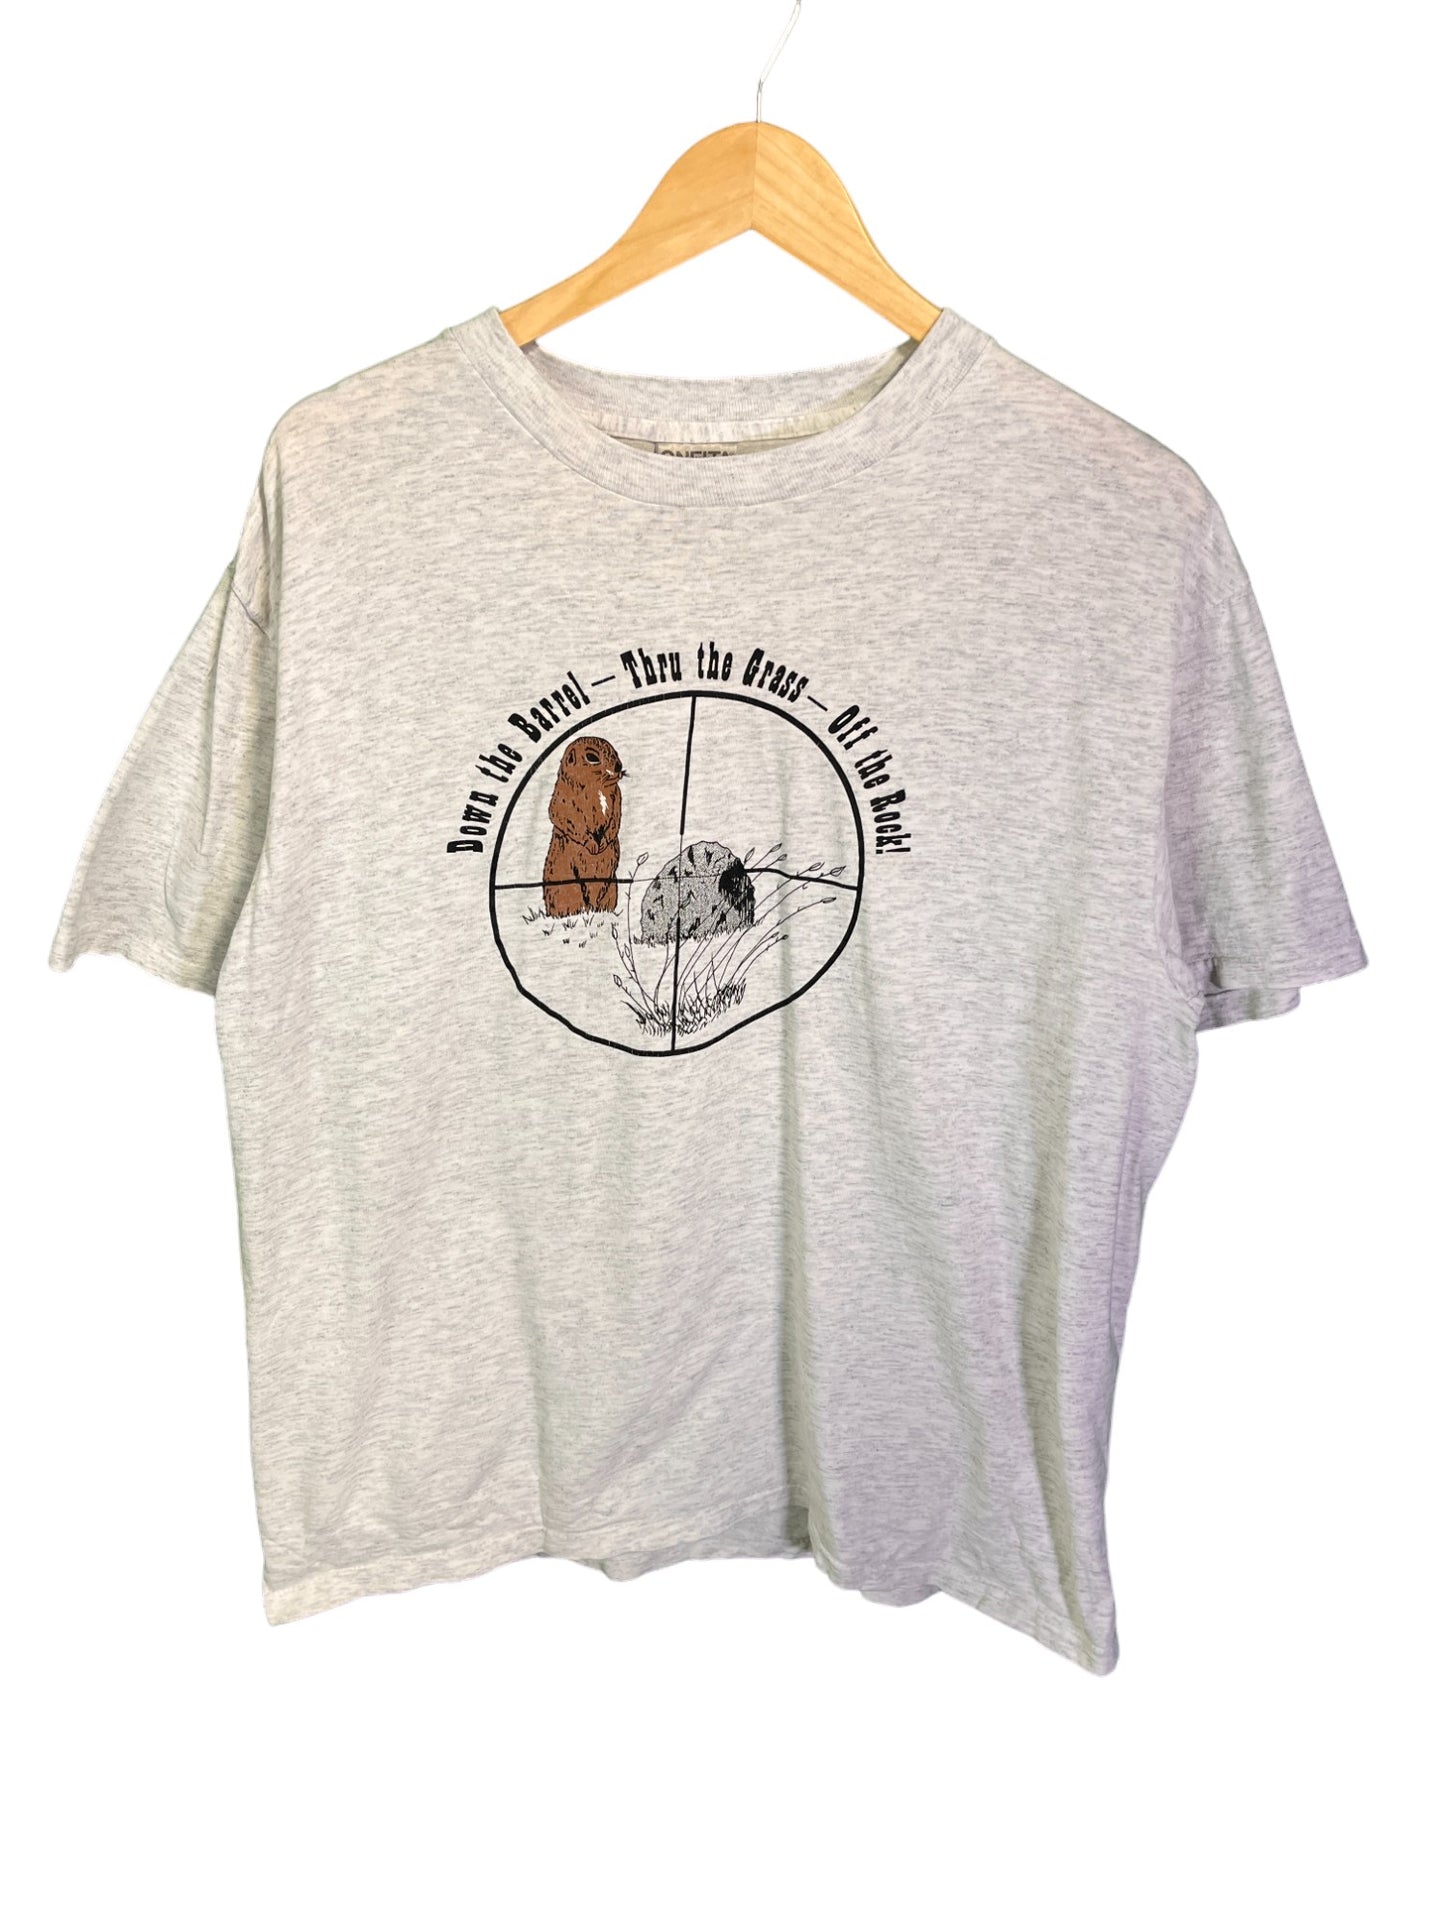 Vintage Down the Barrel Prairie Dog Hunting Graphic Tee Size Large